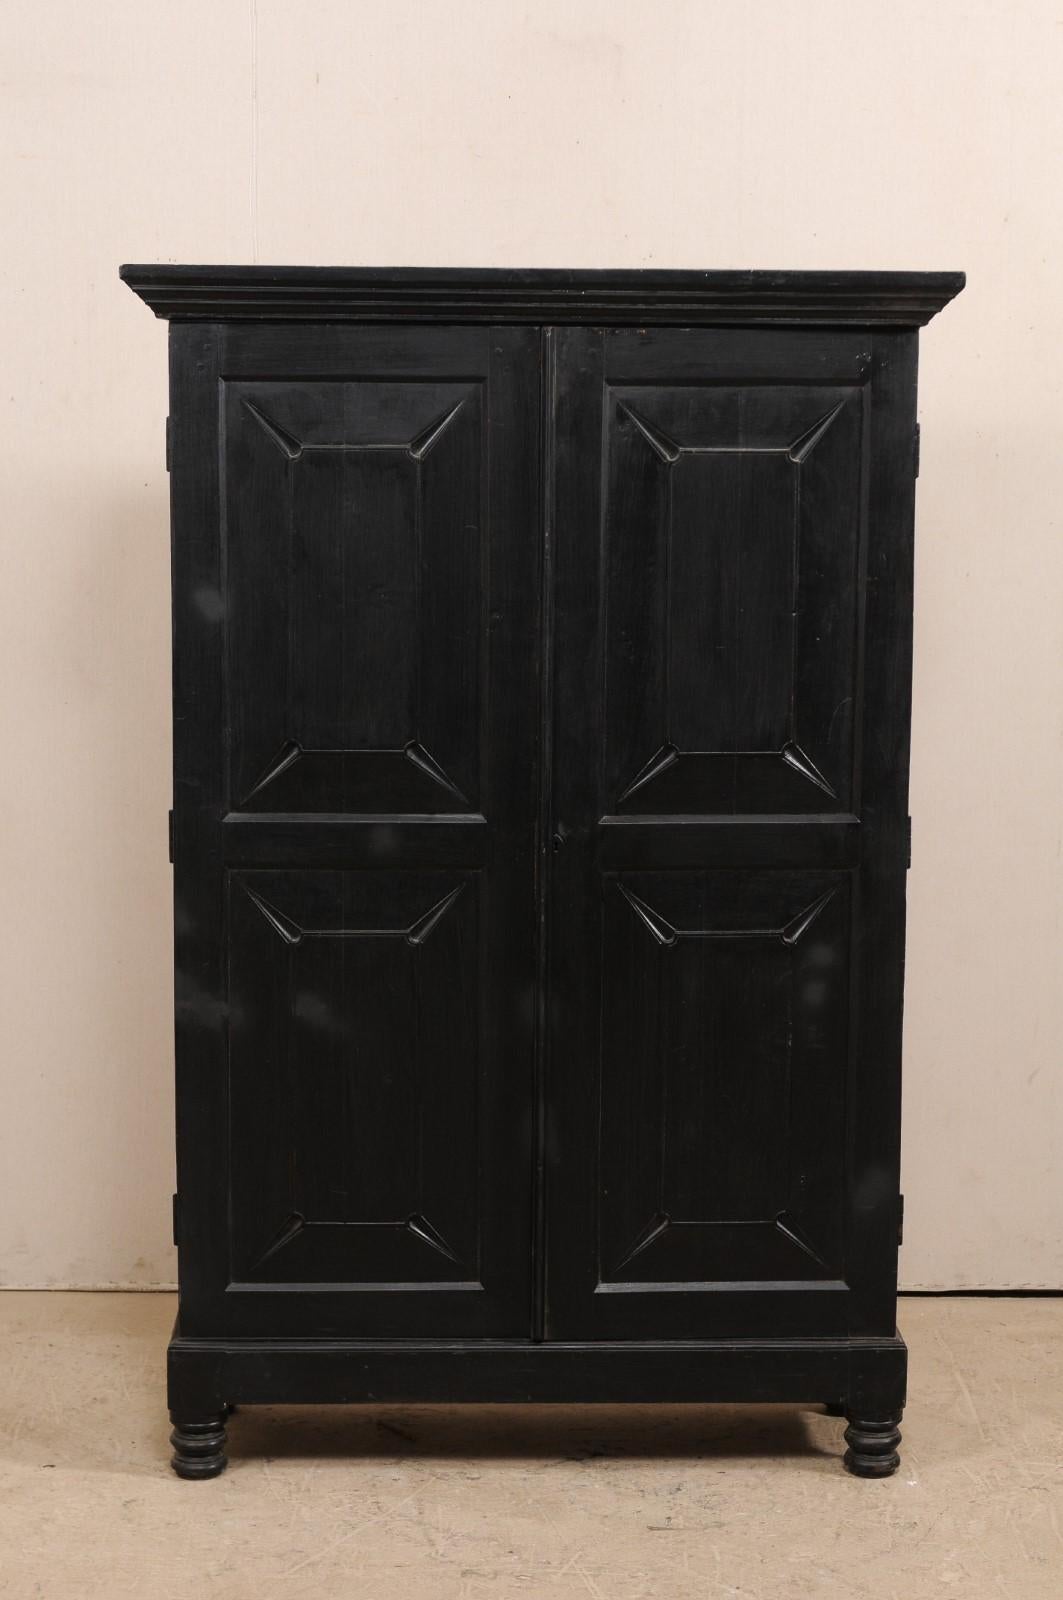 A British Colonial cabinet from the mid-20th century. This vintage cabinet features two decoratively carved raised panel doors, revealing the interior shelving within, framed within a molded cornice at top, and plain skirt at cabinet bottom. It is